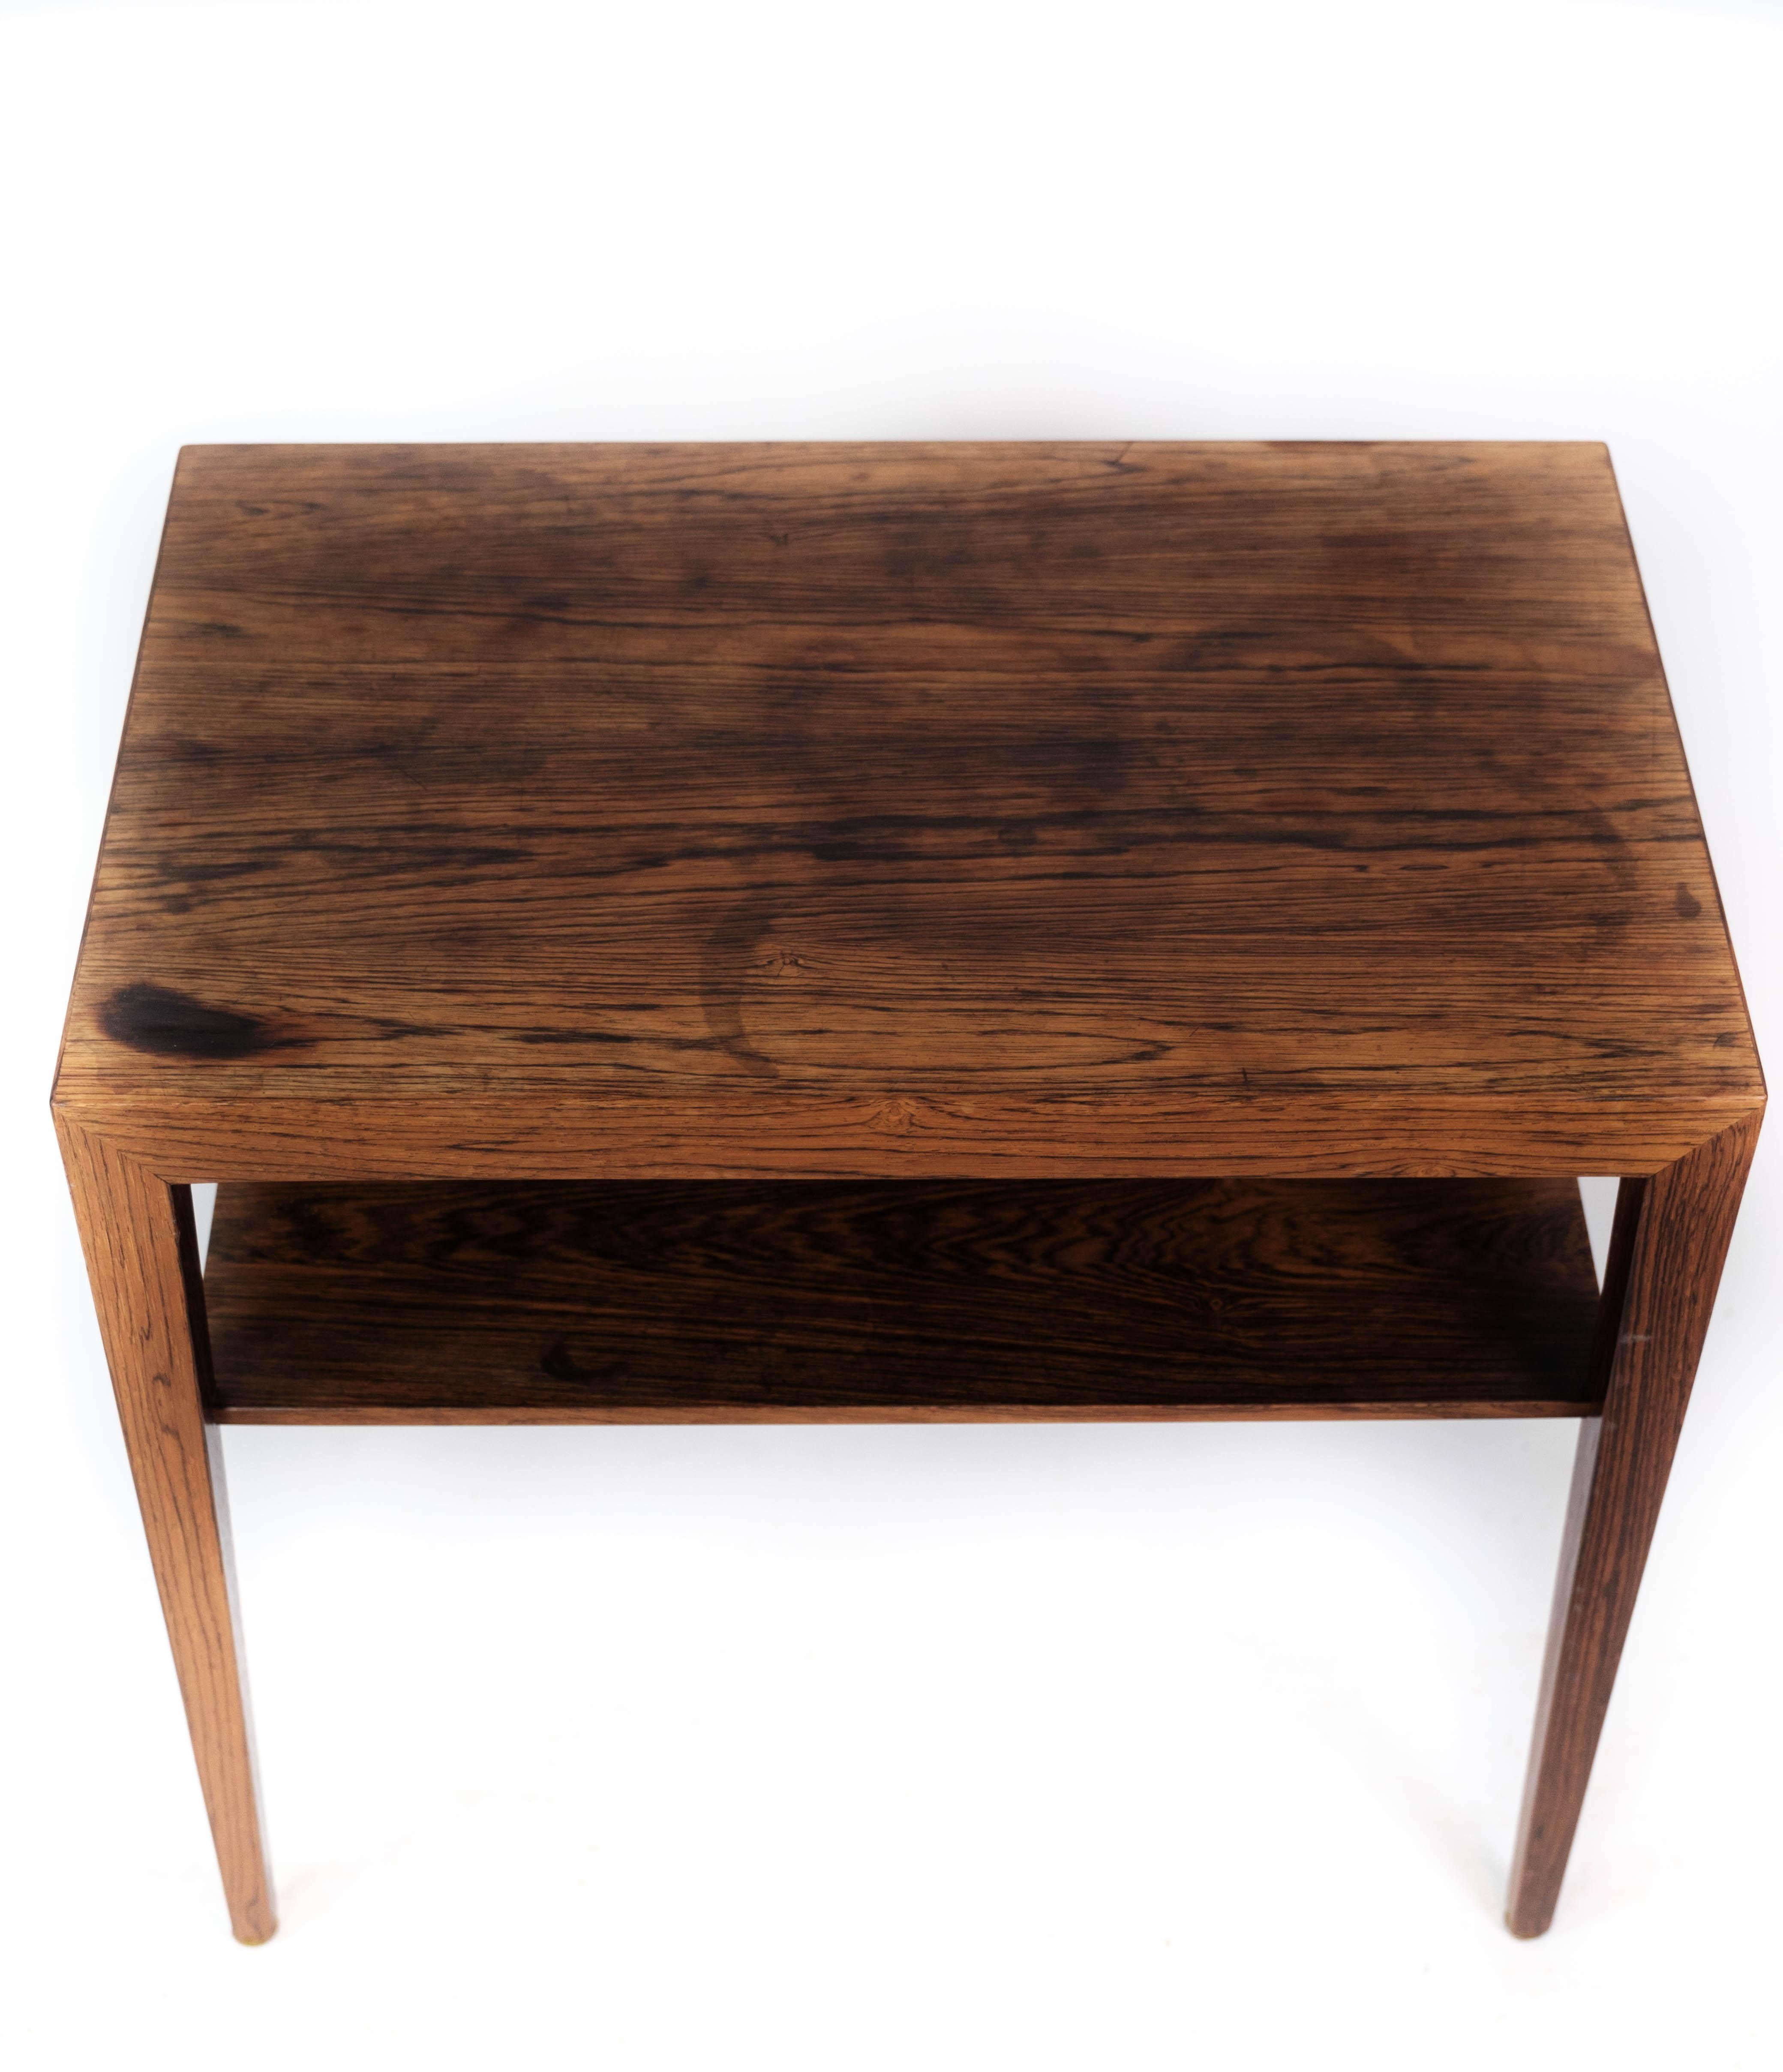 Side table in rosewood designed by Severin Hansen and manufactured by Haslev Furniture in the 1960s. The table is in great vintage condition.